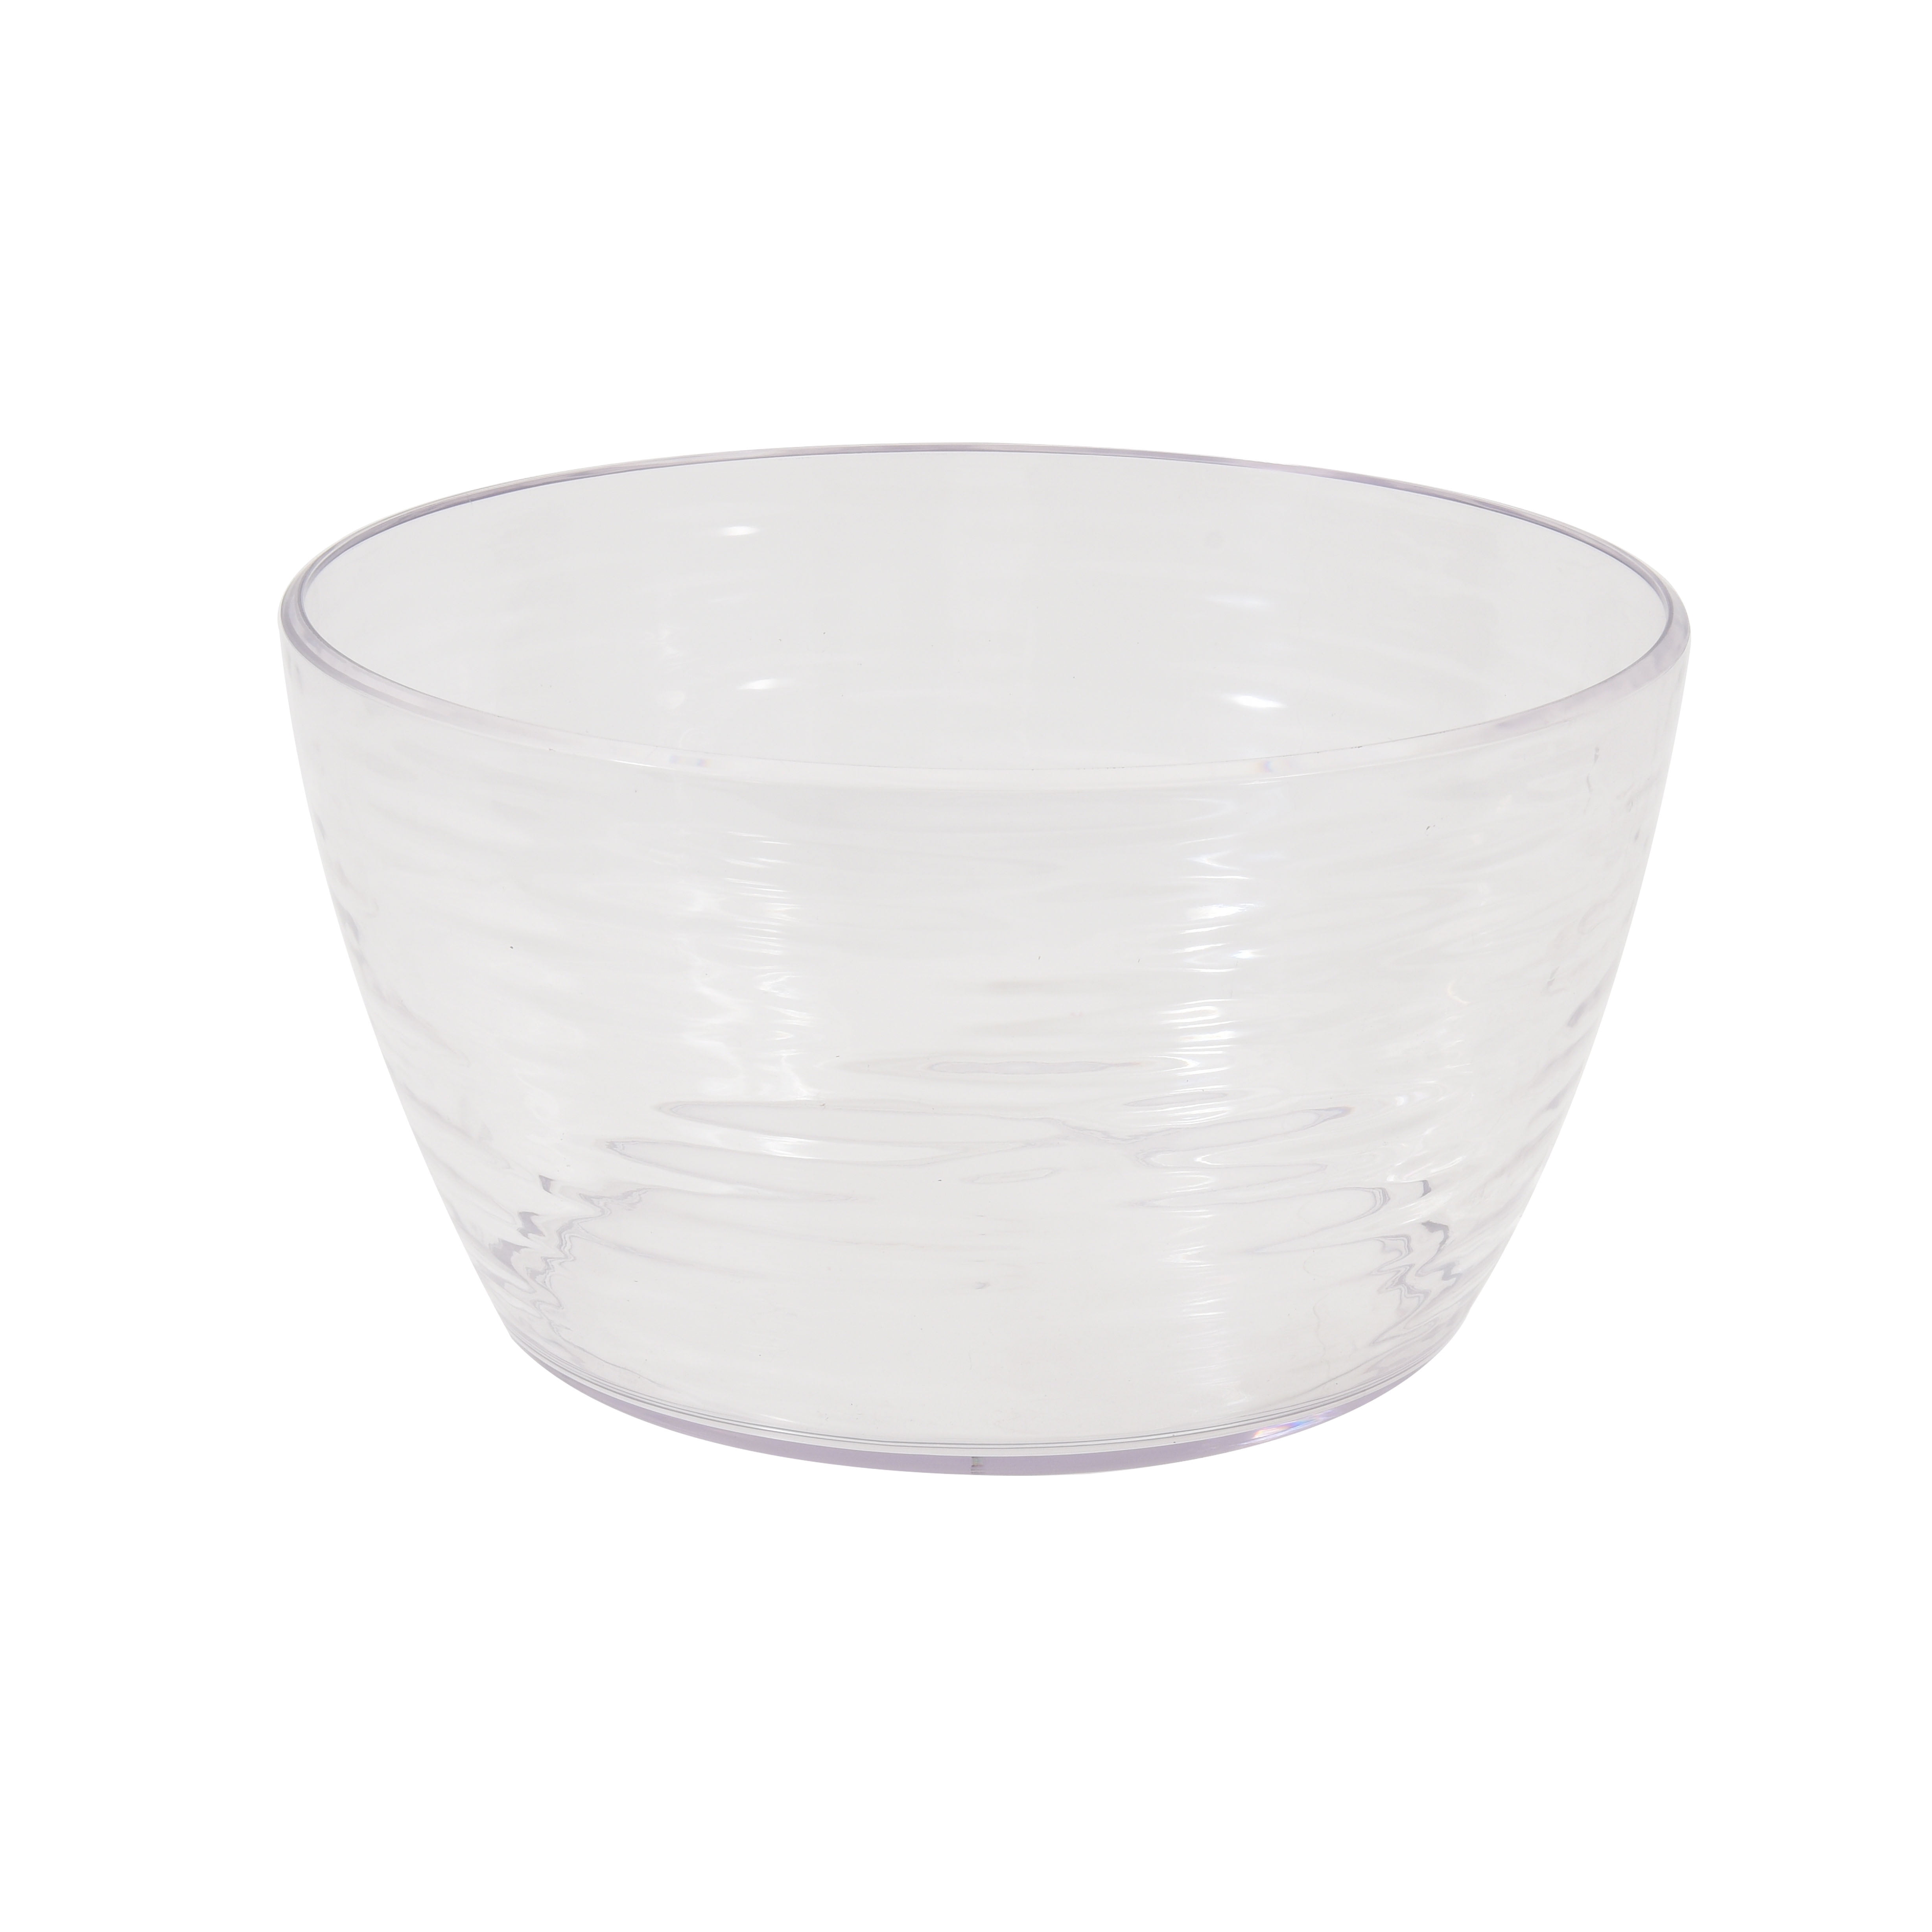 Better Homes & Gardens Round Acrylic Serving Bowl, Large